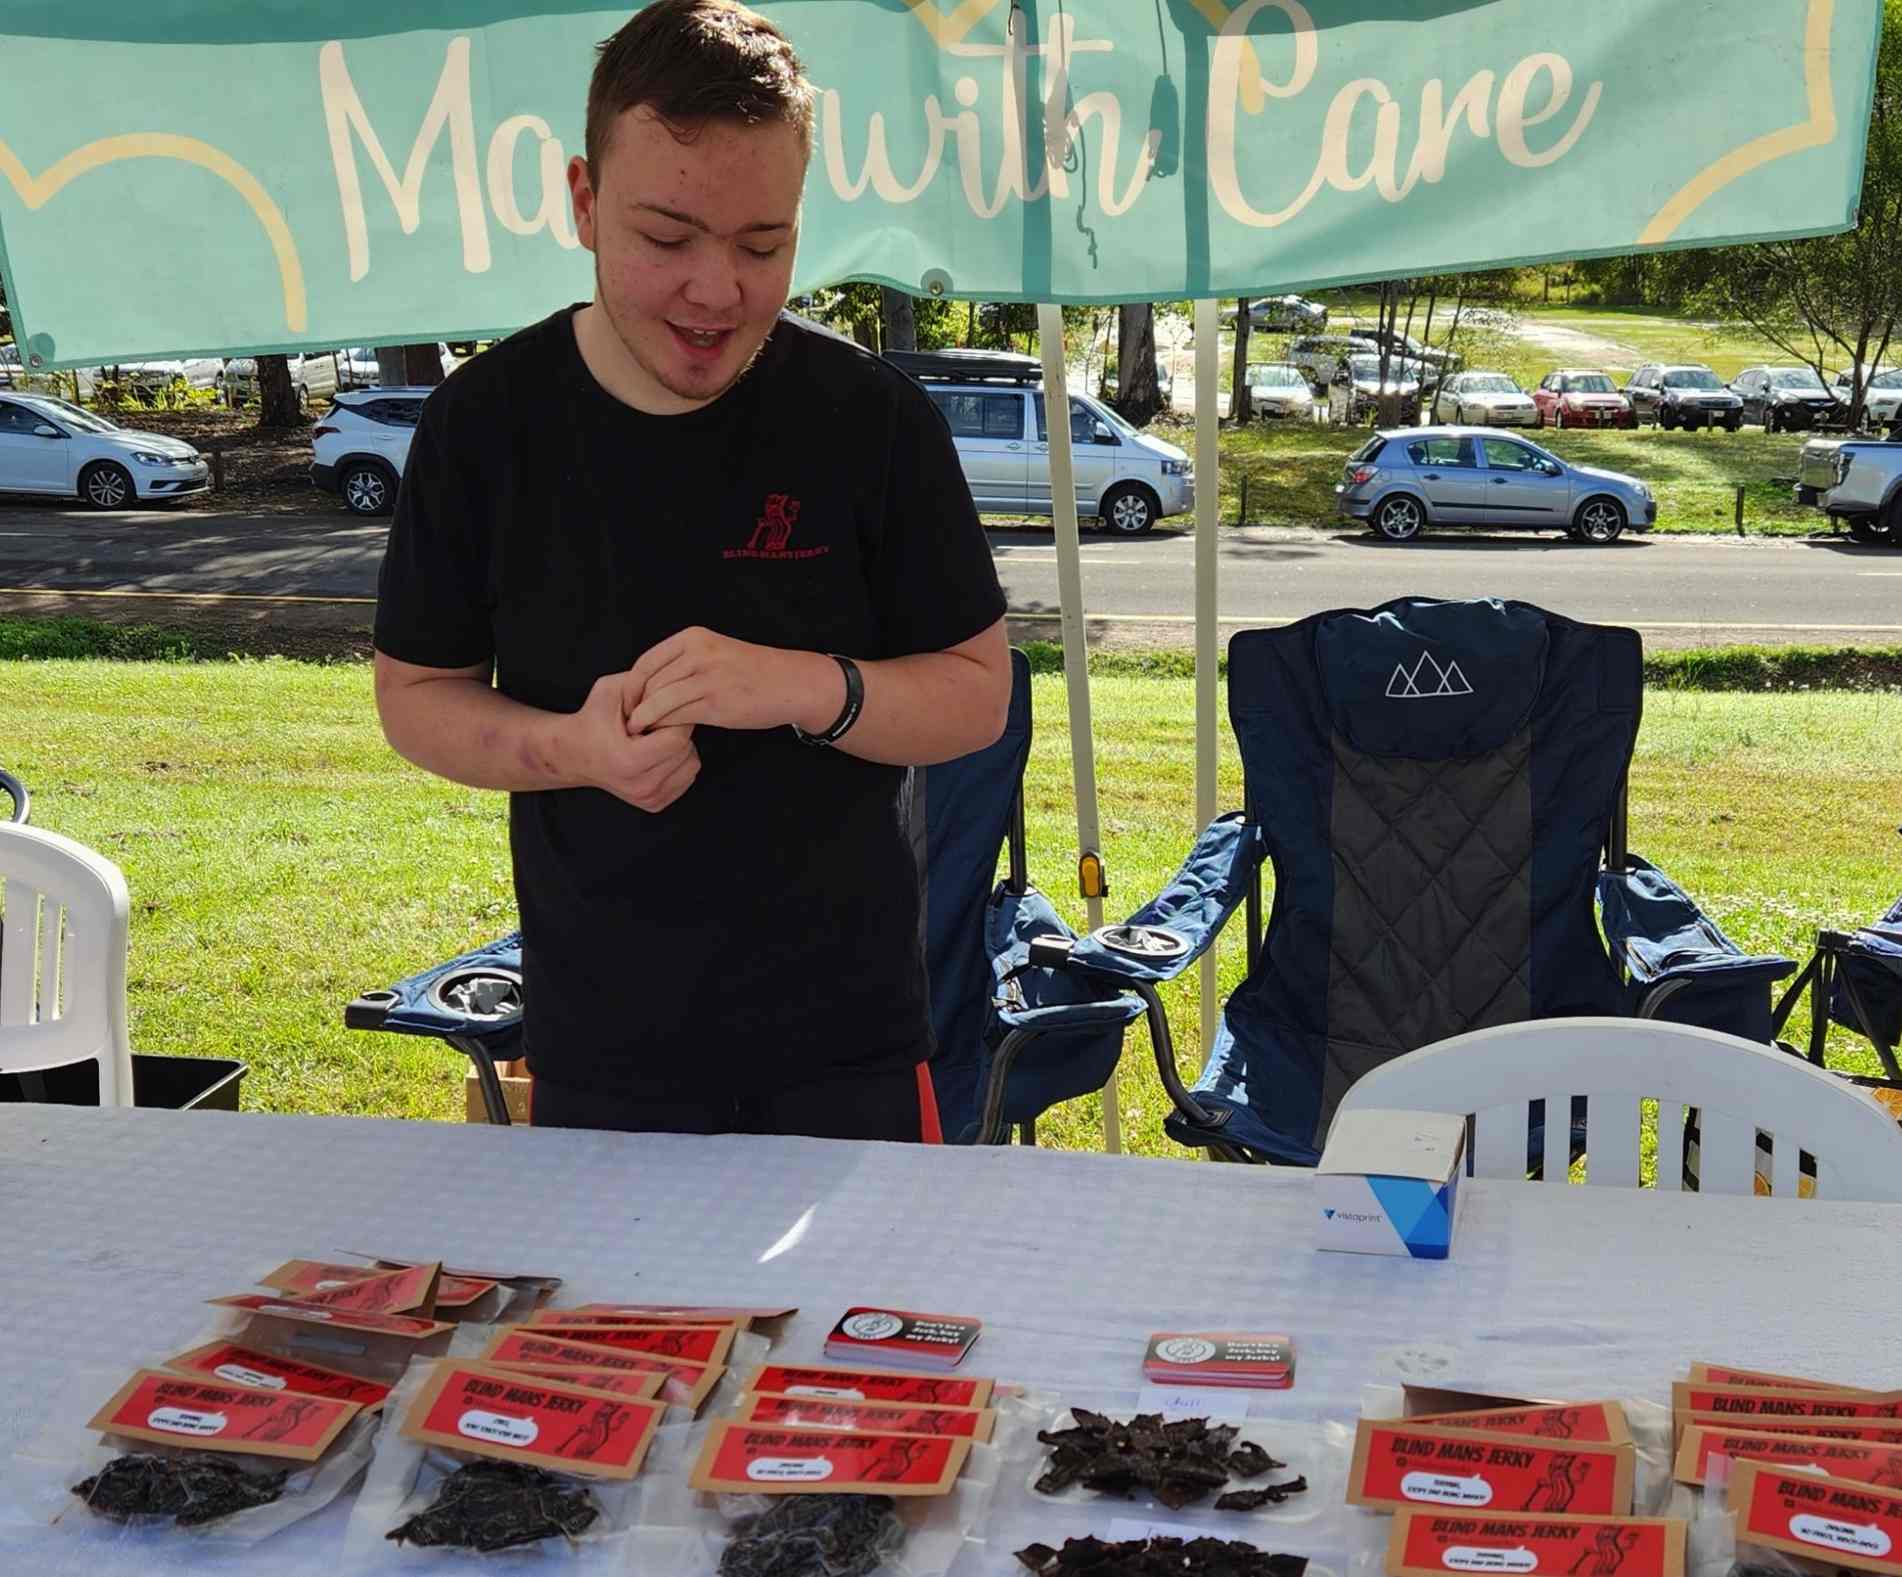 Blind teen chases expansion for beef jerky venture